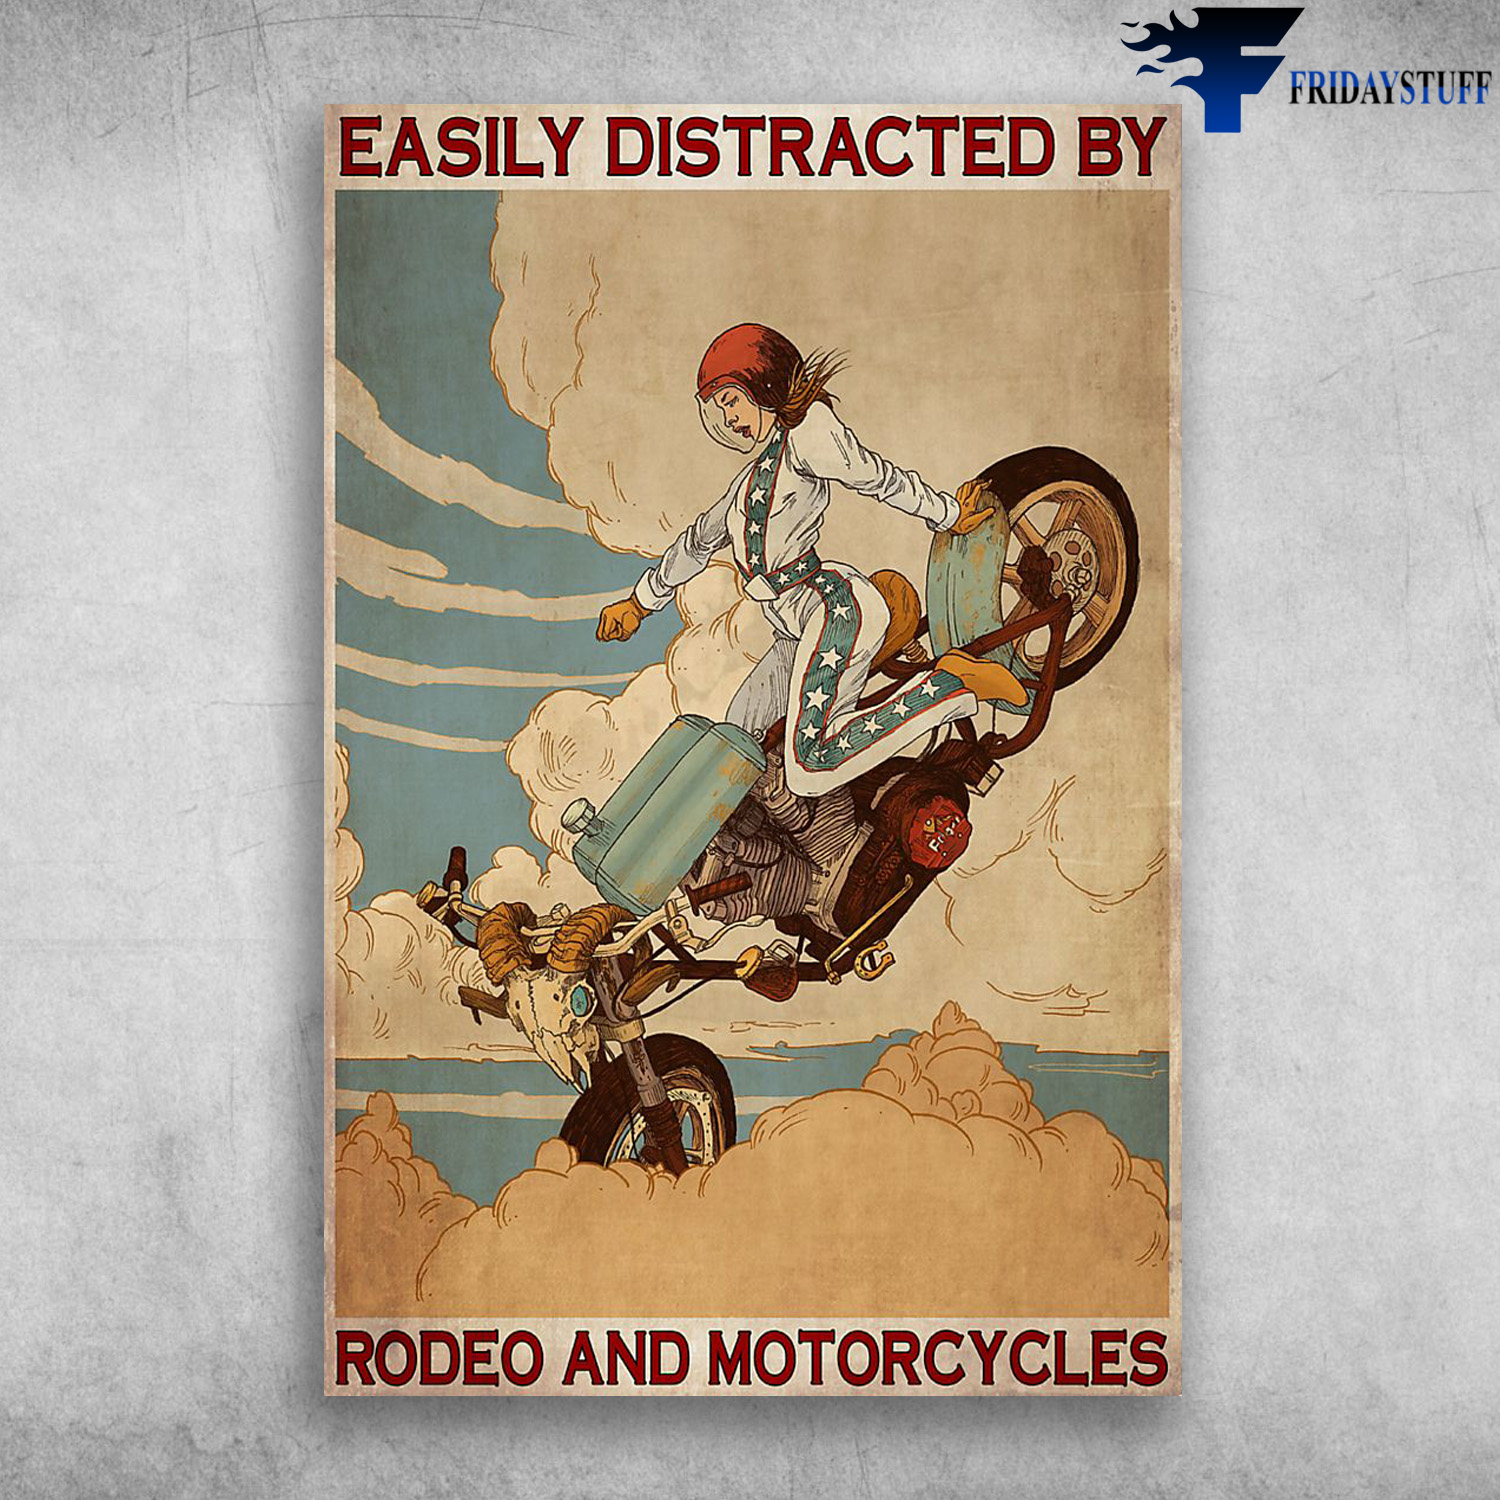 Girl Rodeo Motorcycles - Easily Distracted By Rodeo And Motorcycles